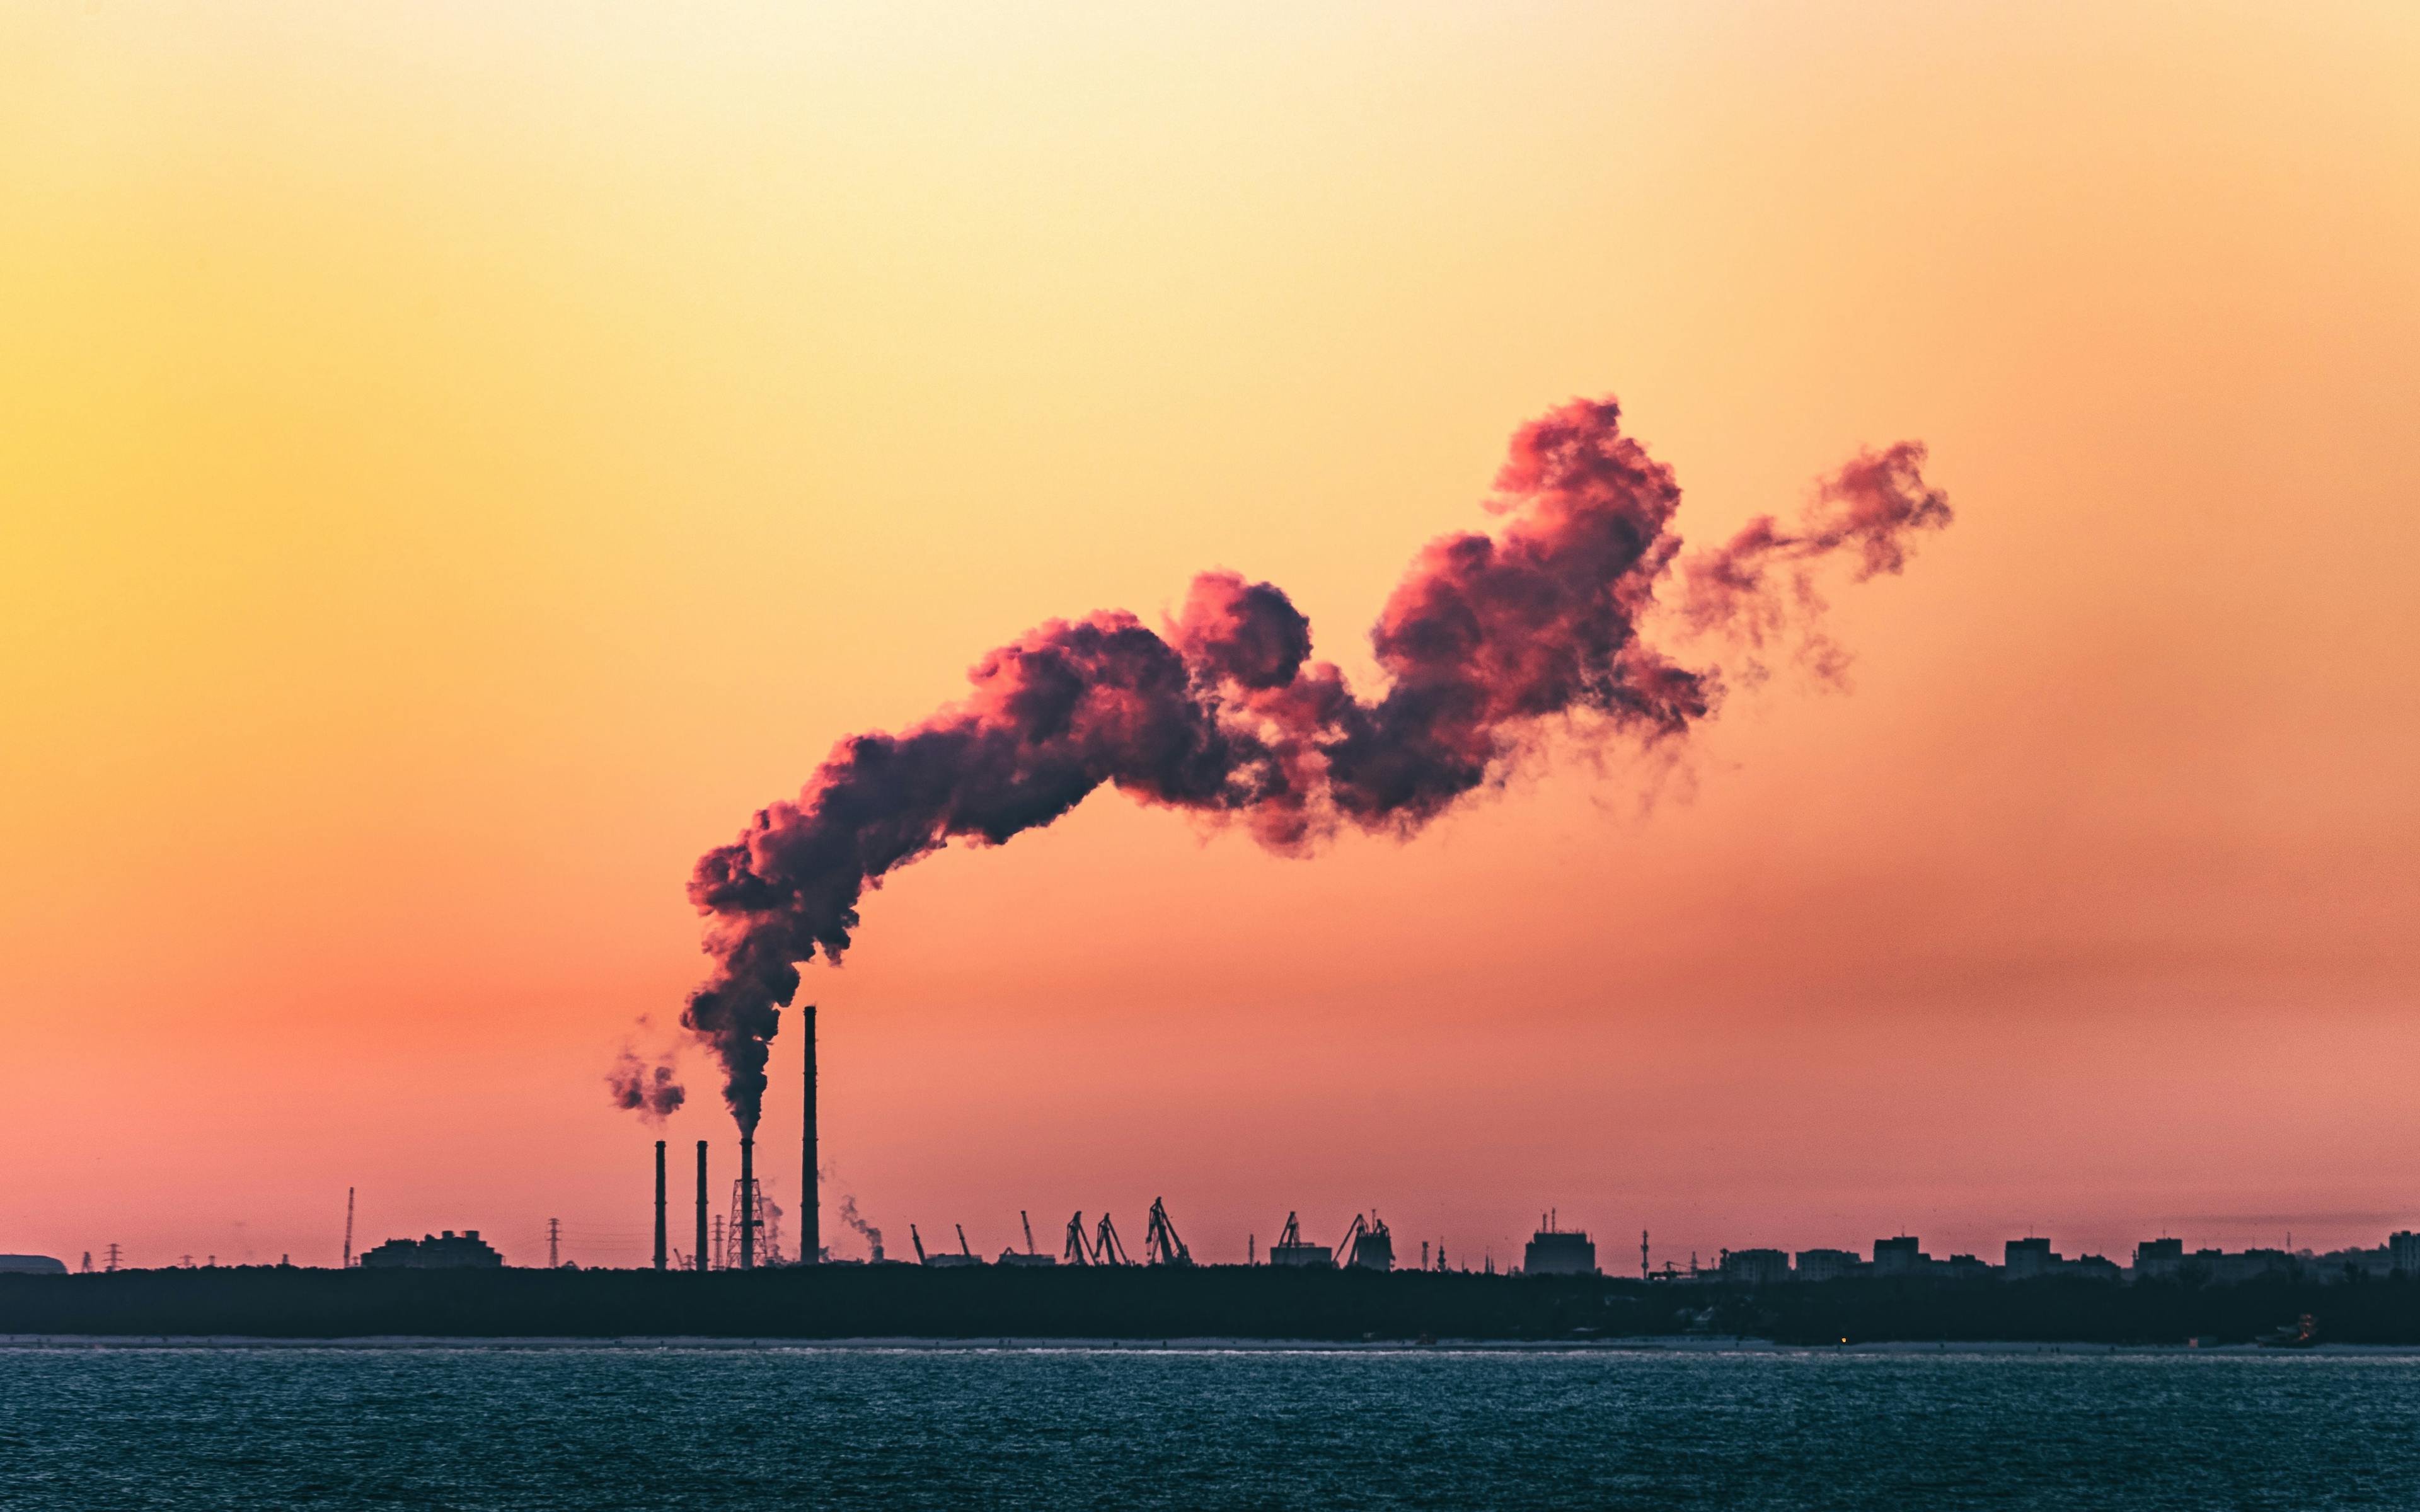 Adopt an internal carbon price to drive decarbonization